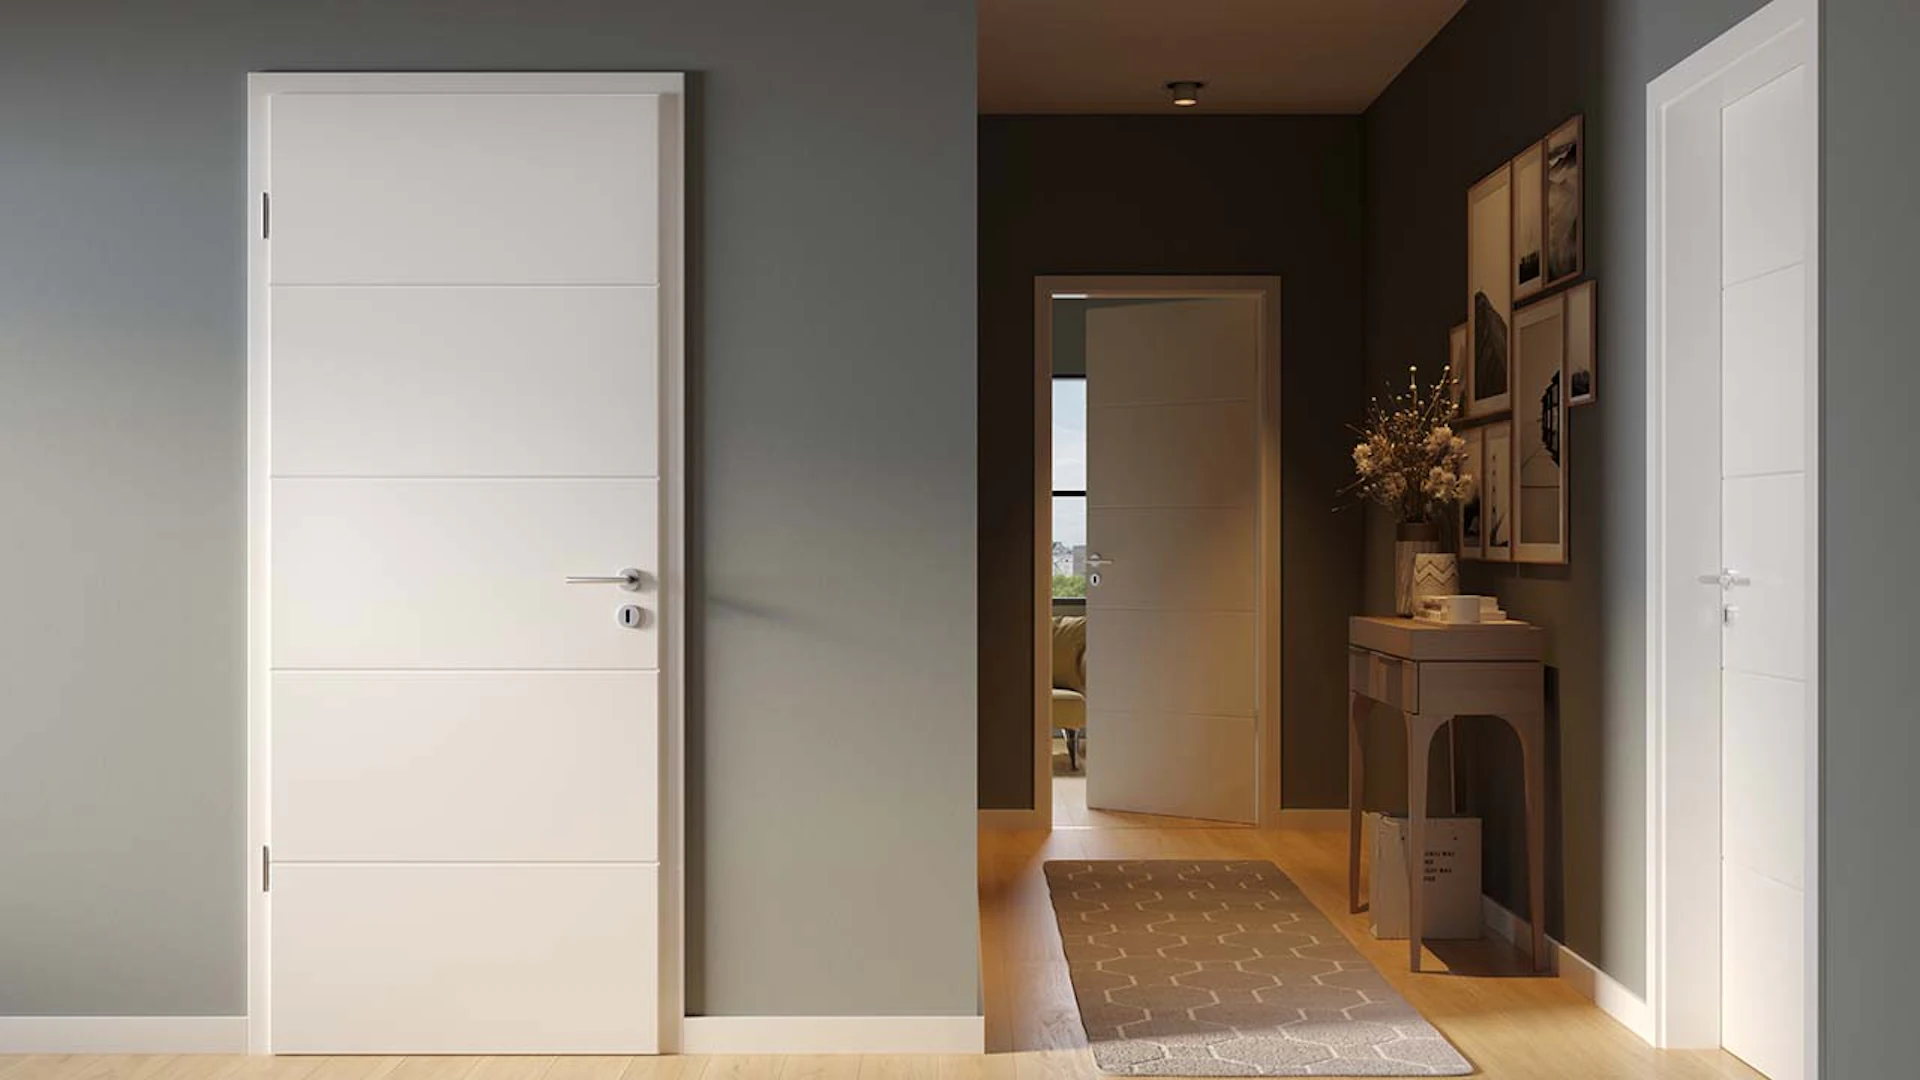 planeo Interior door lacquer 2.0 - Kinga 9010 White lacquer 2110 x 985 mm DIN L - Round RSP hinge 3-t